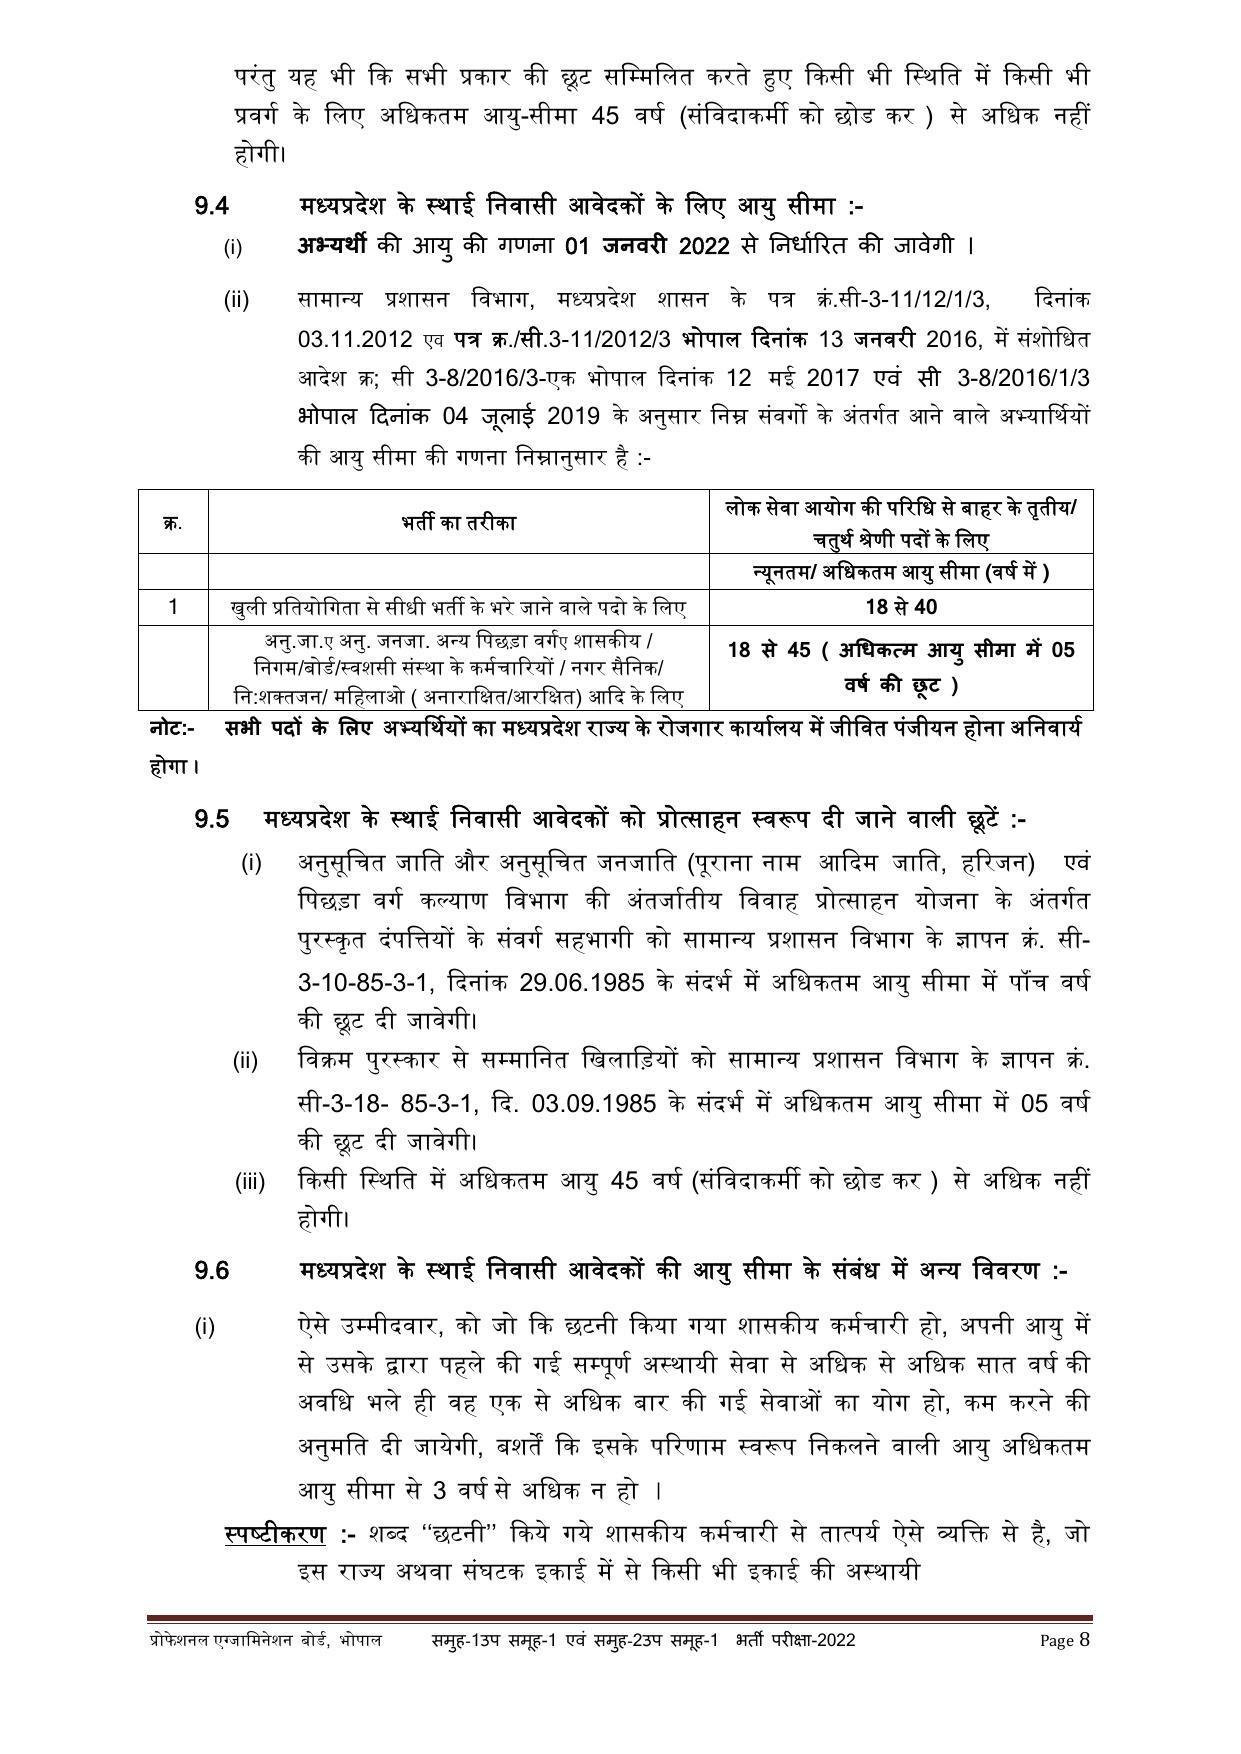 MPPEB Group-I Sub Group-I & Group-II Sub Group-I Recruitment 2022 - Page 50